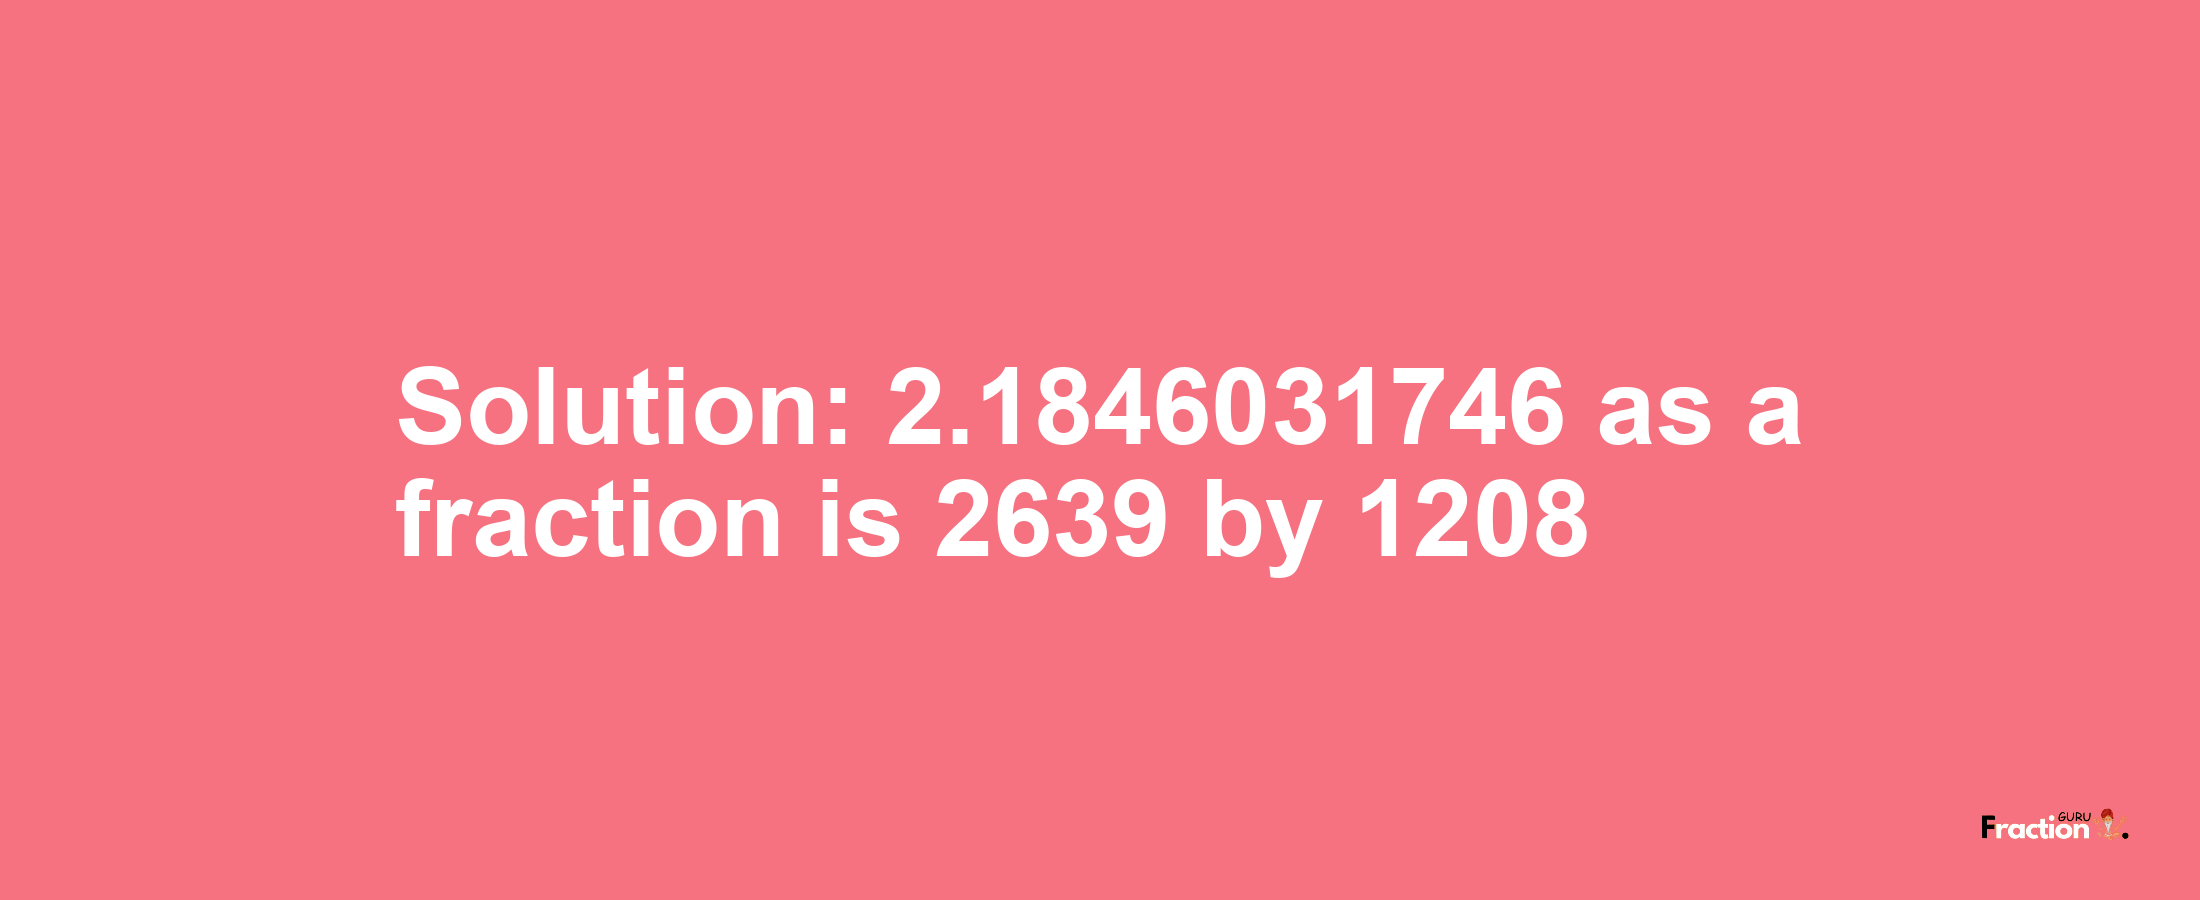 Solution:2.1846031746 as a fraction is 2639/1208